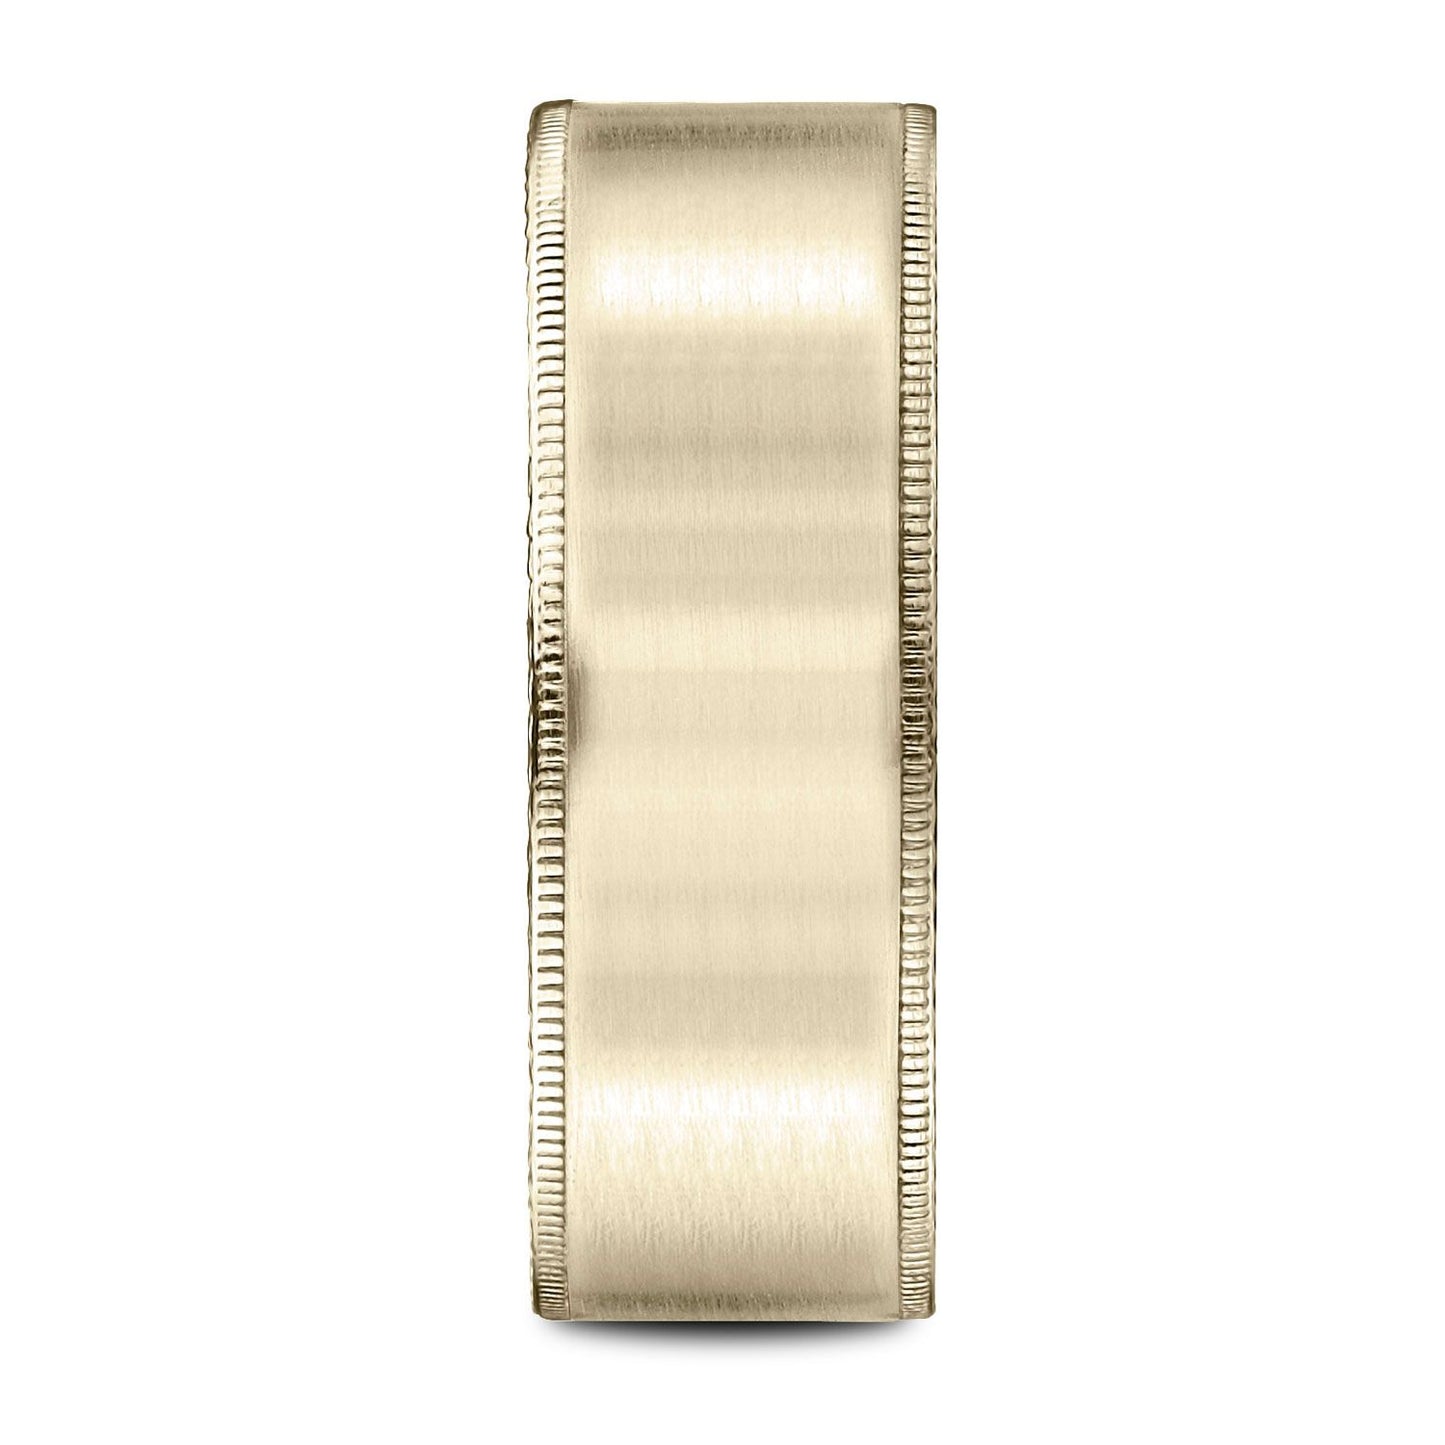 14k Yellow Gold 8mm Comfort-fit Riveted Edge Satin Finish Design Band